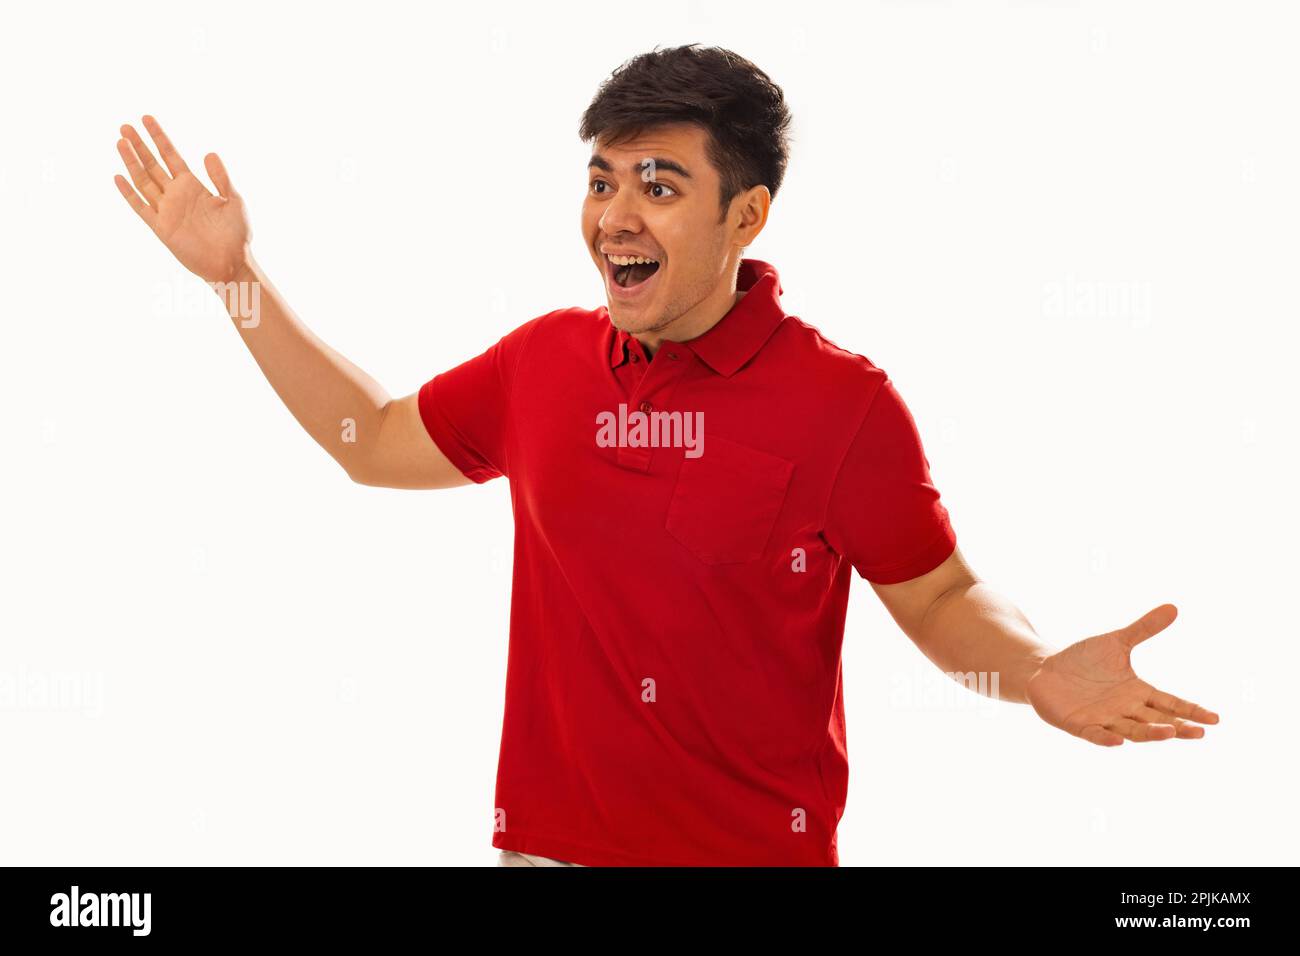 Portrait of an excited young man gesturing against white background Stock Photo